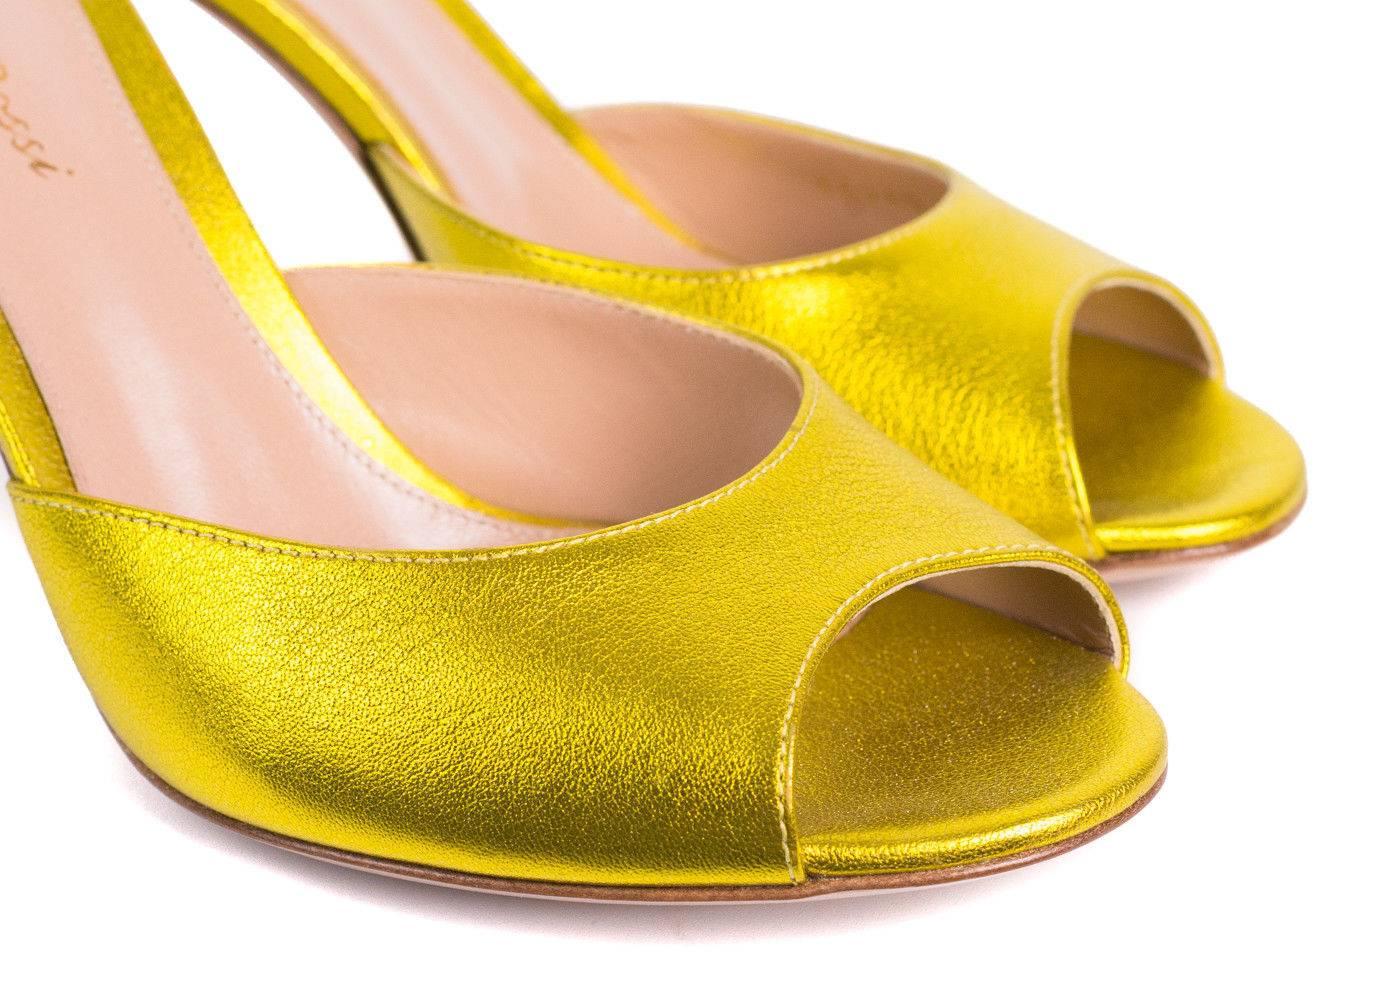 Gianvito Rossi Metallic Citrus Leather Mule Sandal Heel In New Condition For Sale In Brooklyn, NY